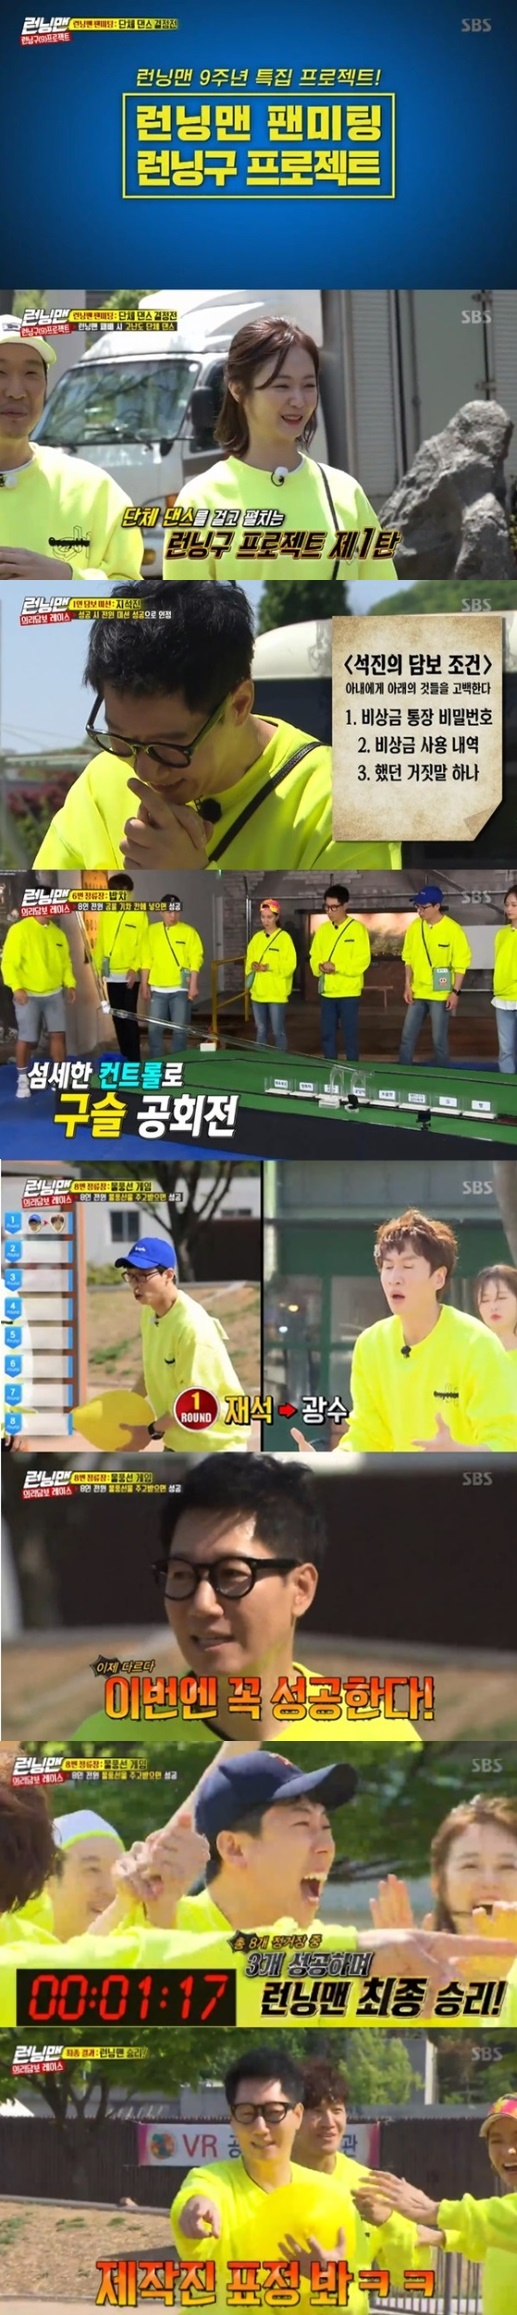 Running Man marked its ninth anniversary, marking a rise in ratings.According to Nielsen Korea, a ratings agency on the 20th, the SBS entertainment program Running Man, which was broadcast on the 19th, ranked first in the overwhelming same time zone with 5.1% (based on the second part of the Seoul Capital Areas household ratings), which was higher than last week in the 2049 target audience rating.The average audience rating also rose, recording 5.3% in the first part and 8.4% in the second part (based on the audience rating of households in the Seoul Seoul Capital Area), and the highest audience rating per minute rose to 8.9%.As mentioned earlier, the broadcast was decorated with the Running Man 9th anniversary special project Running Man Fan Meeting - Running Zone Project.The crew and members who had a special race for four weeks with the right to organize a fan meeting queue sheet played their first showdown on the day of the show.If the members win, they can dance in addition to the candidate dance prepared by the production team, but if they are defeated, they have to dance recommended by the production team.The members were united in teamwork and started a fierce 8th round confrontation with the production team, eventually winning three wins and winning the victory.The scene had the highest audience rating of 8.9% per minute, accounting for the best one minute.